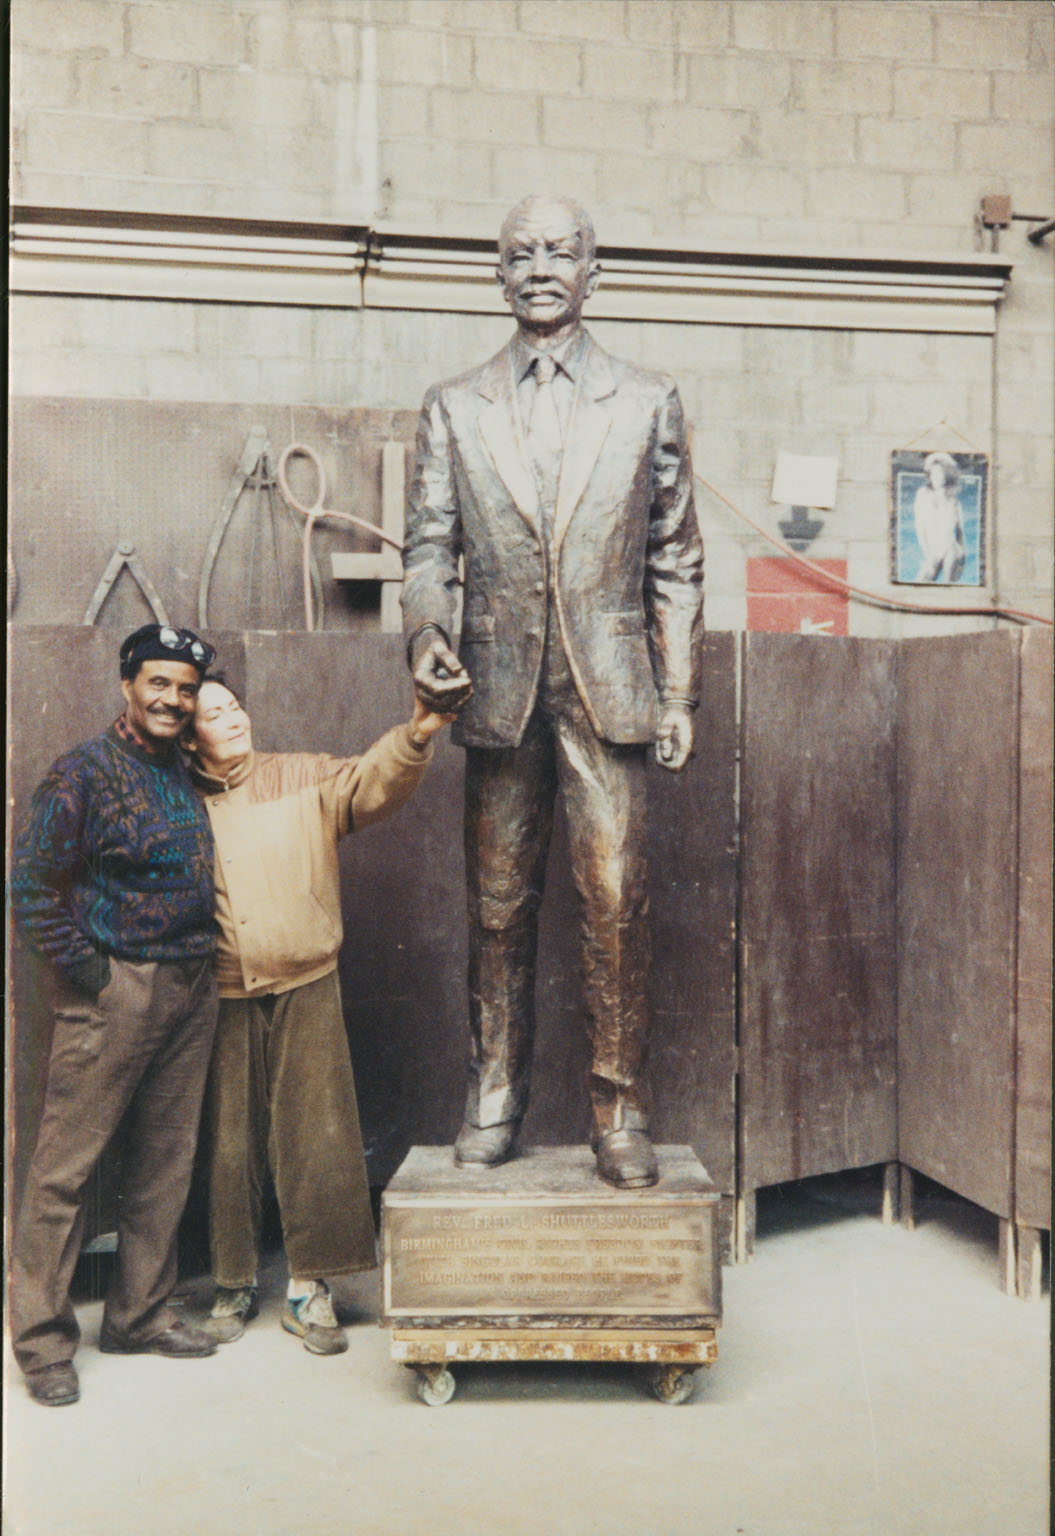 Two people standing next to a bronze sculpture.